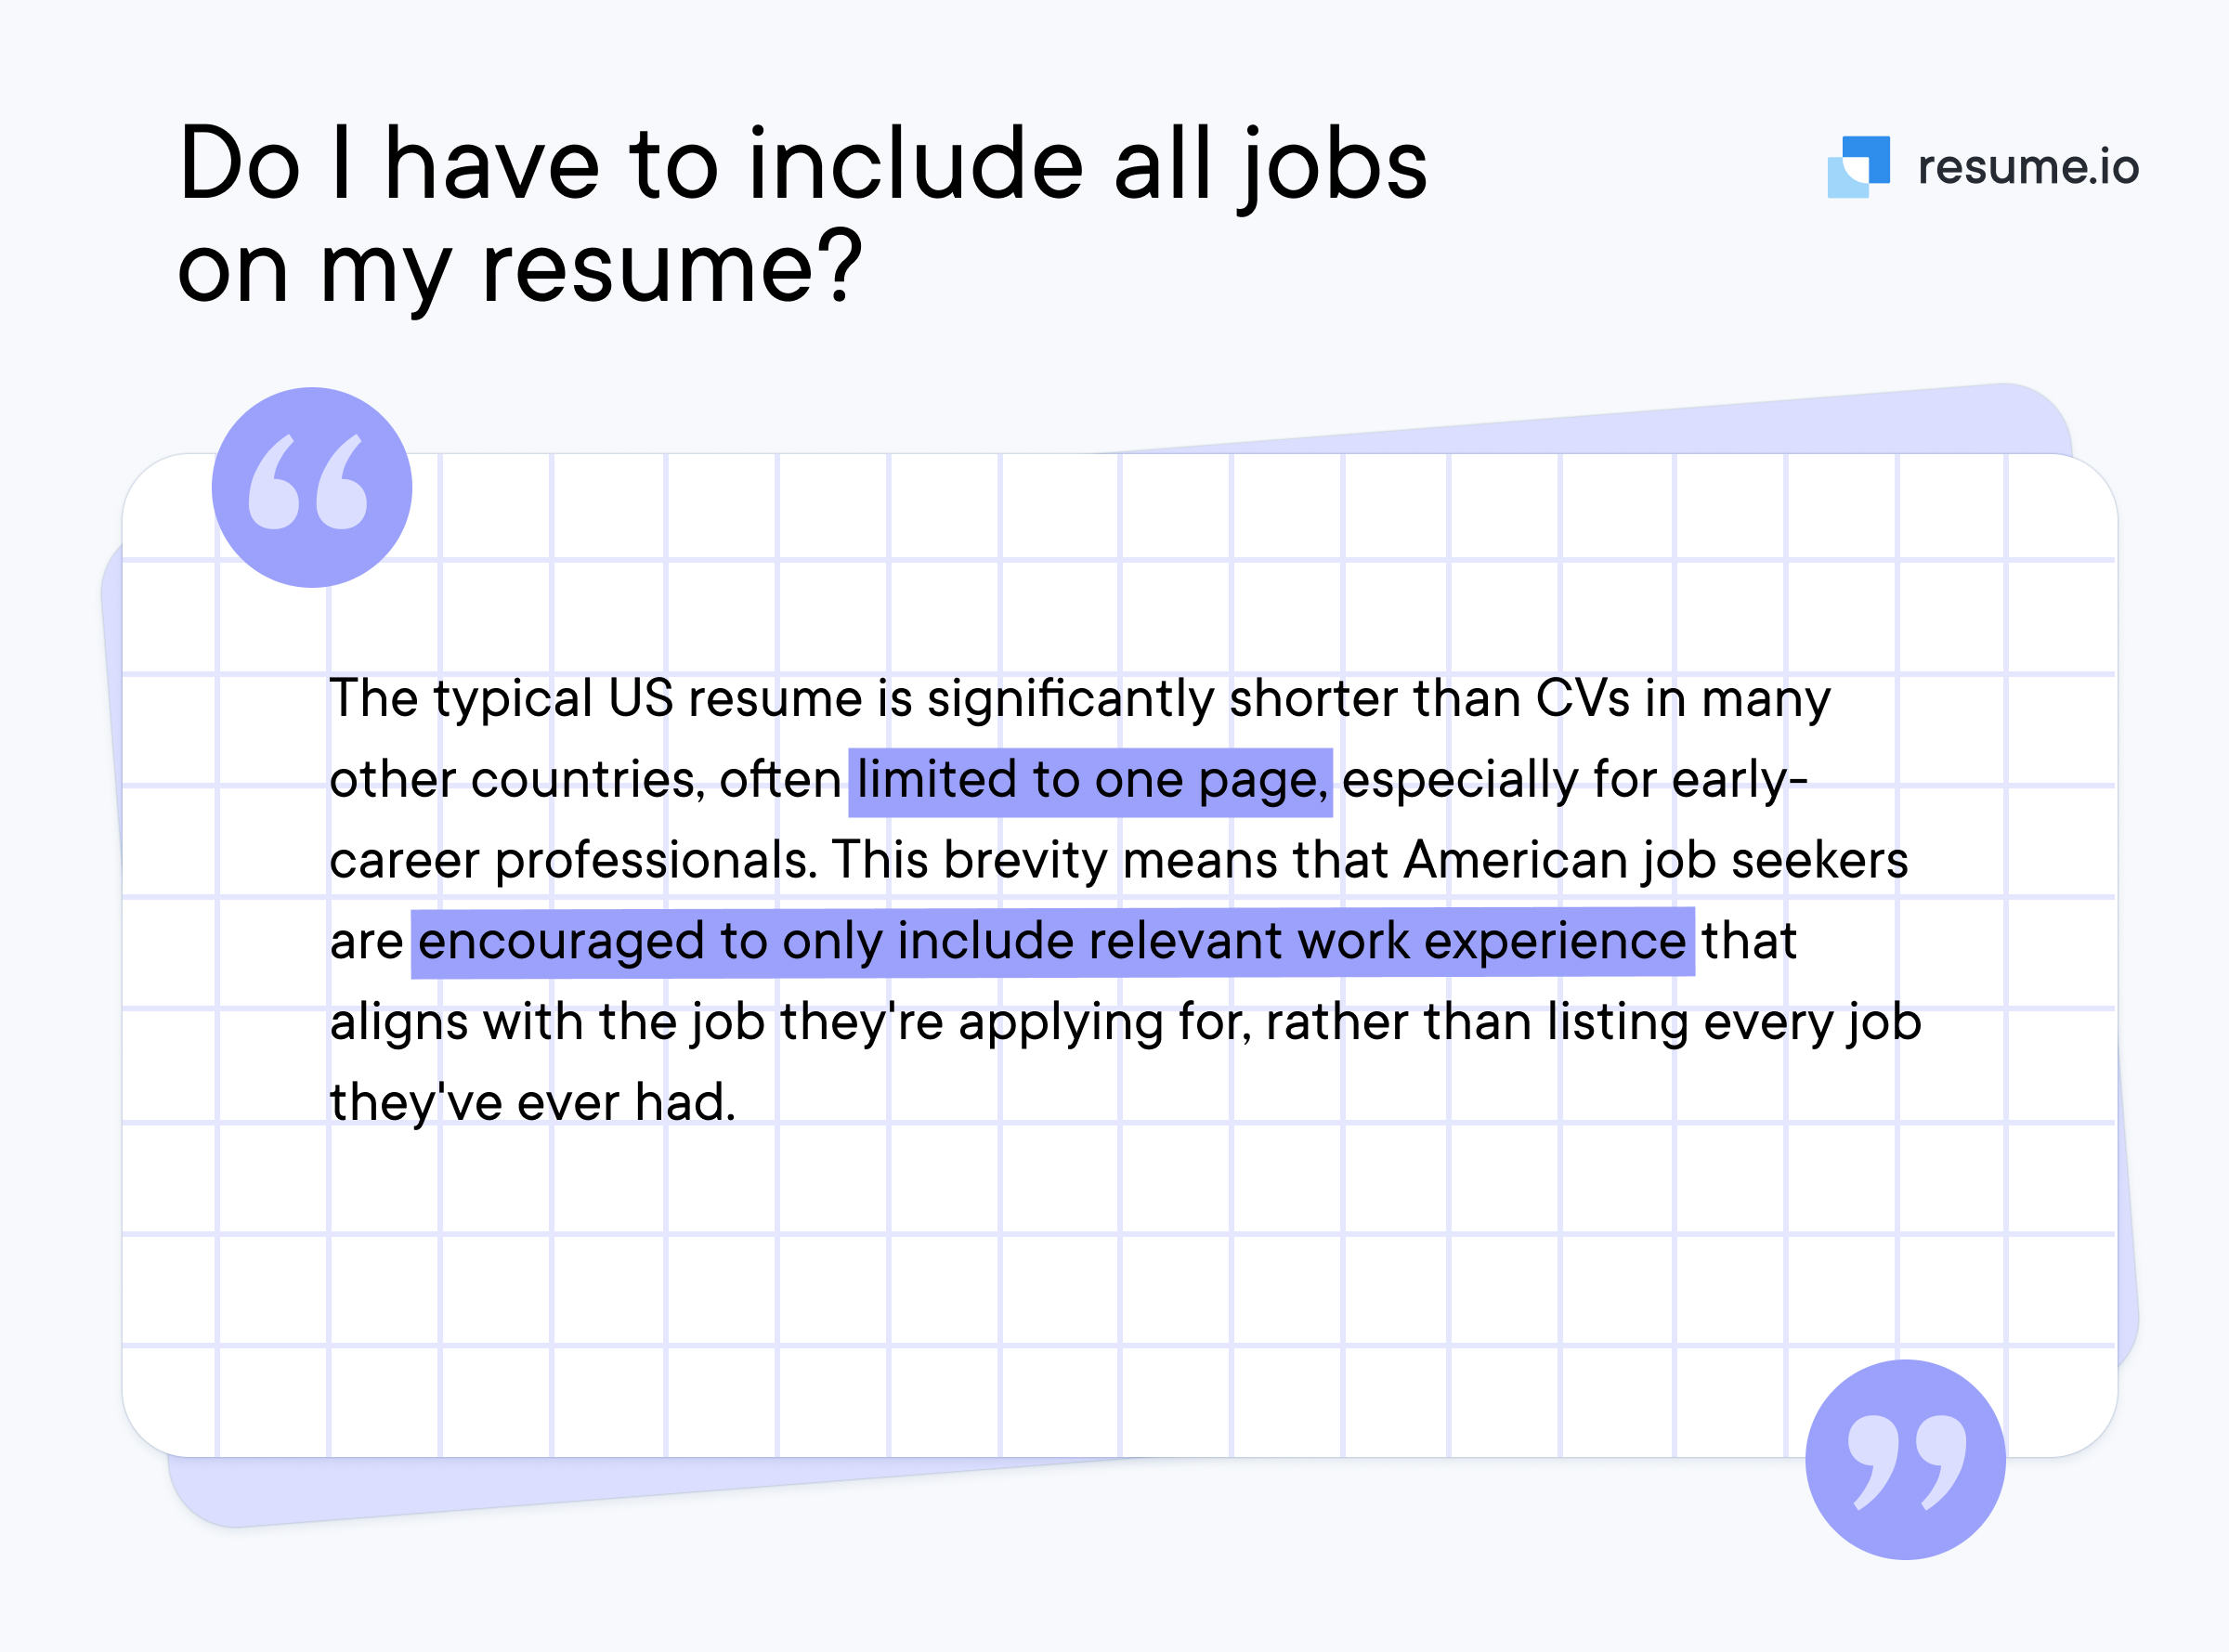 Only include relevant work experience on your CV